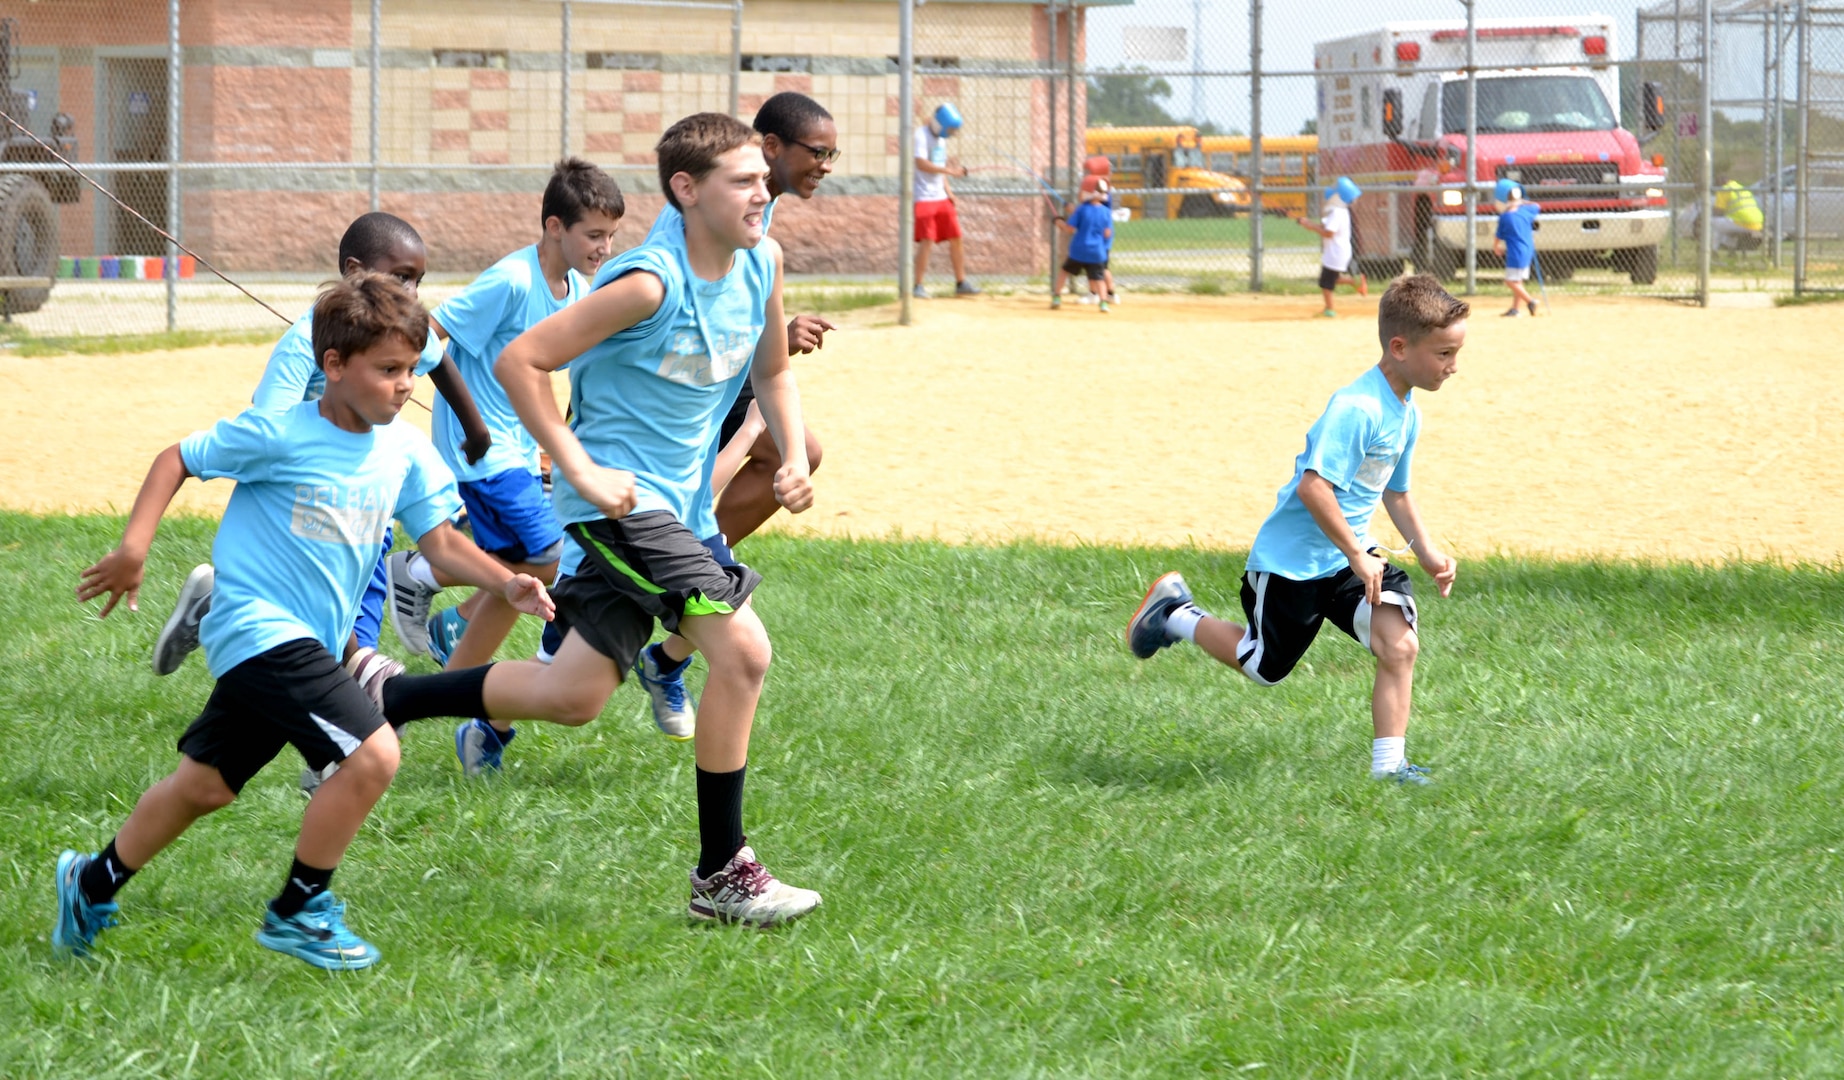 Local children complete seven obstacle courses during the Philly Play Summer Challenge August 10, 2016 in Northeast Philadelphia. DLA Troop Support active duty personnel were among nearly 40 military personnel to help more than 2,000 local children during the event, aimed at encouraging teamwork and physical fitness.